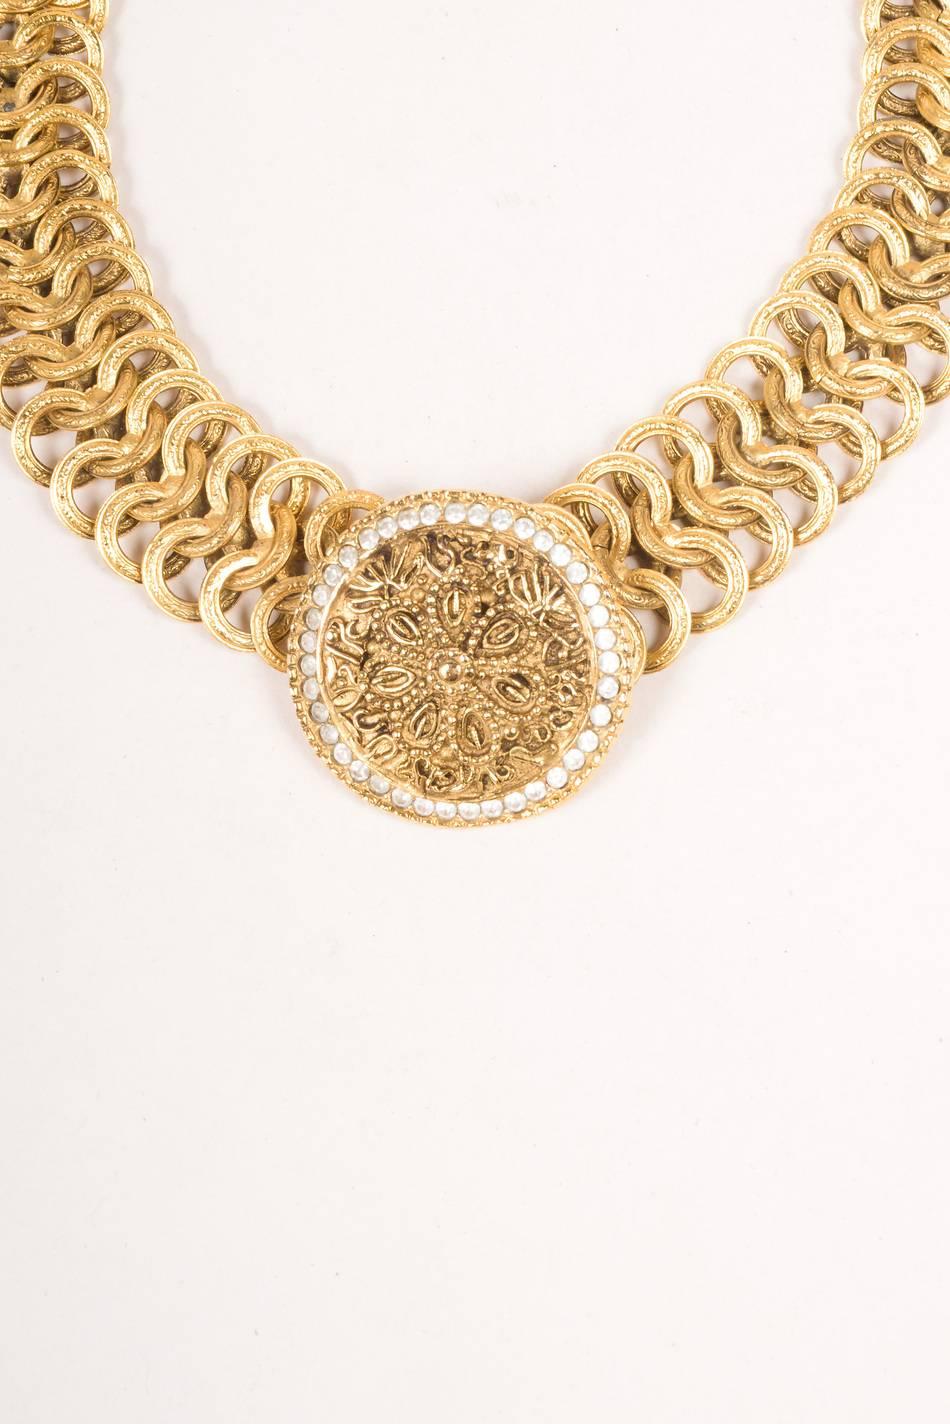 Chanel Gold Tone Chain Link Floral Medallion Choker Necklace In Good Condition For Sale In Chicago, IL